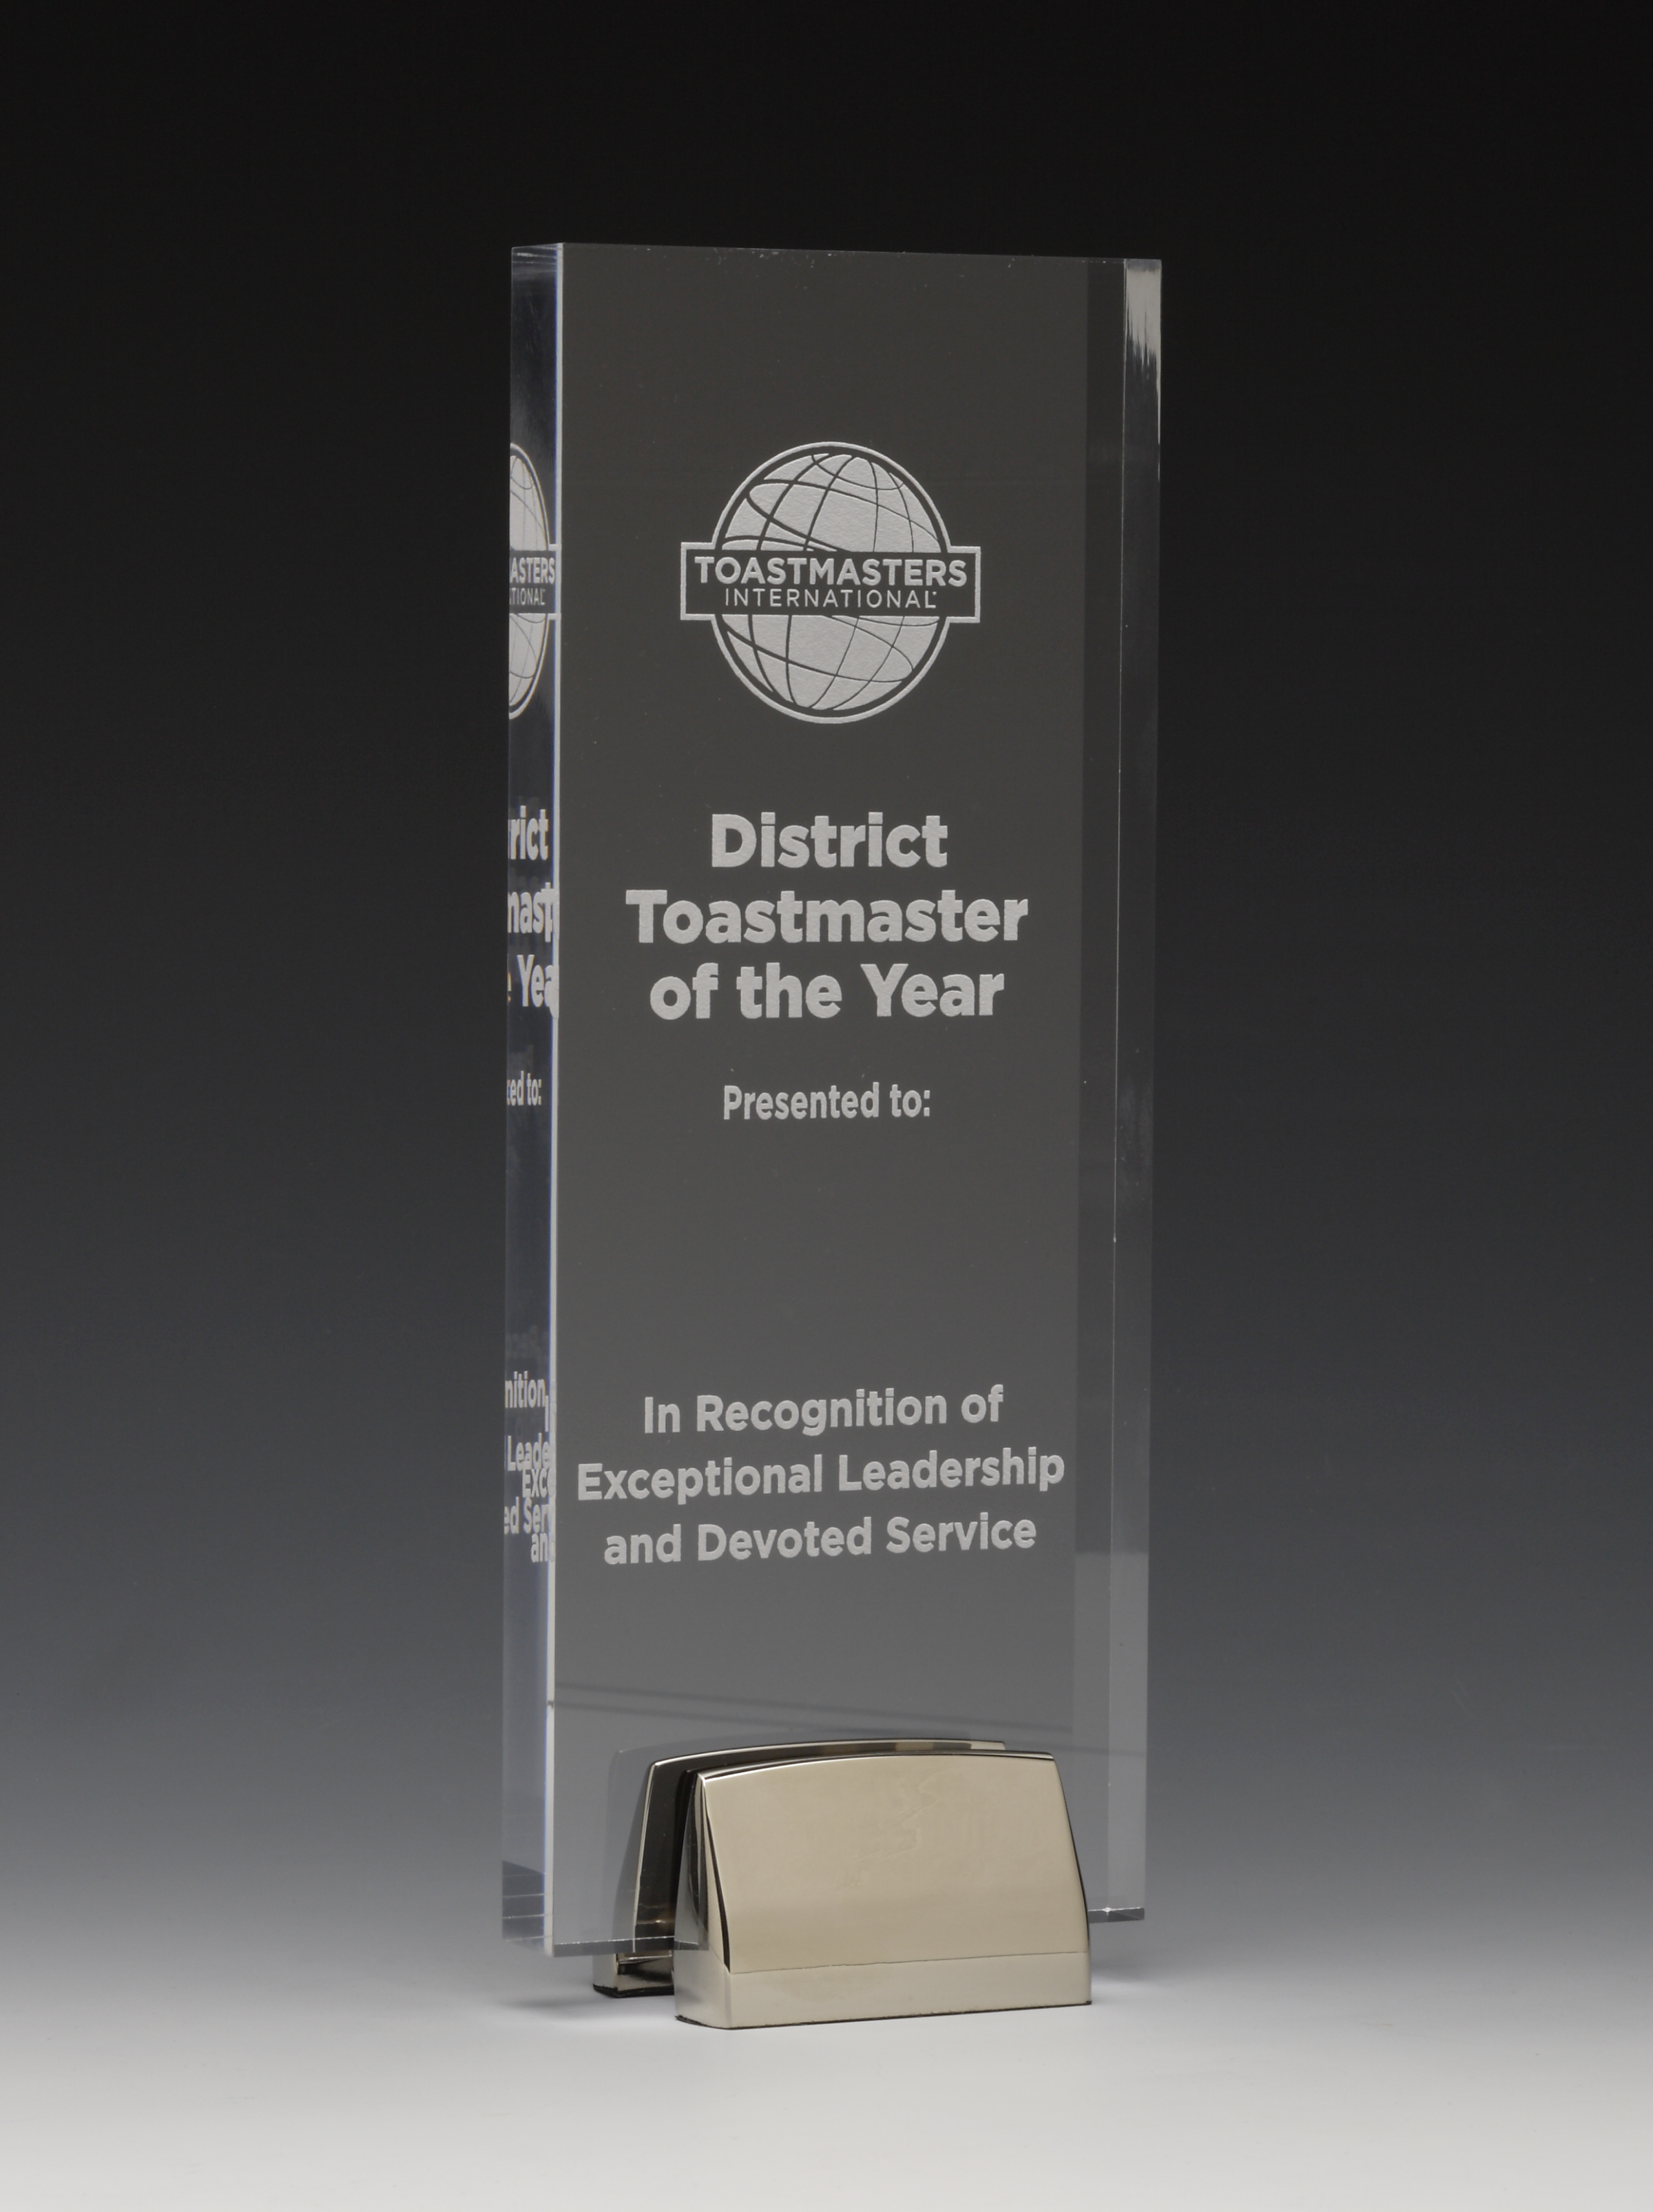 District Toastmaster of the Year Award